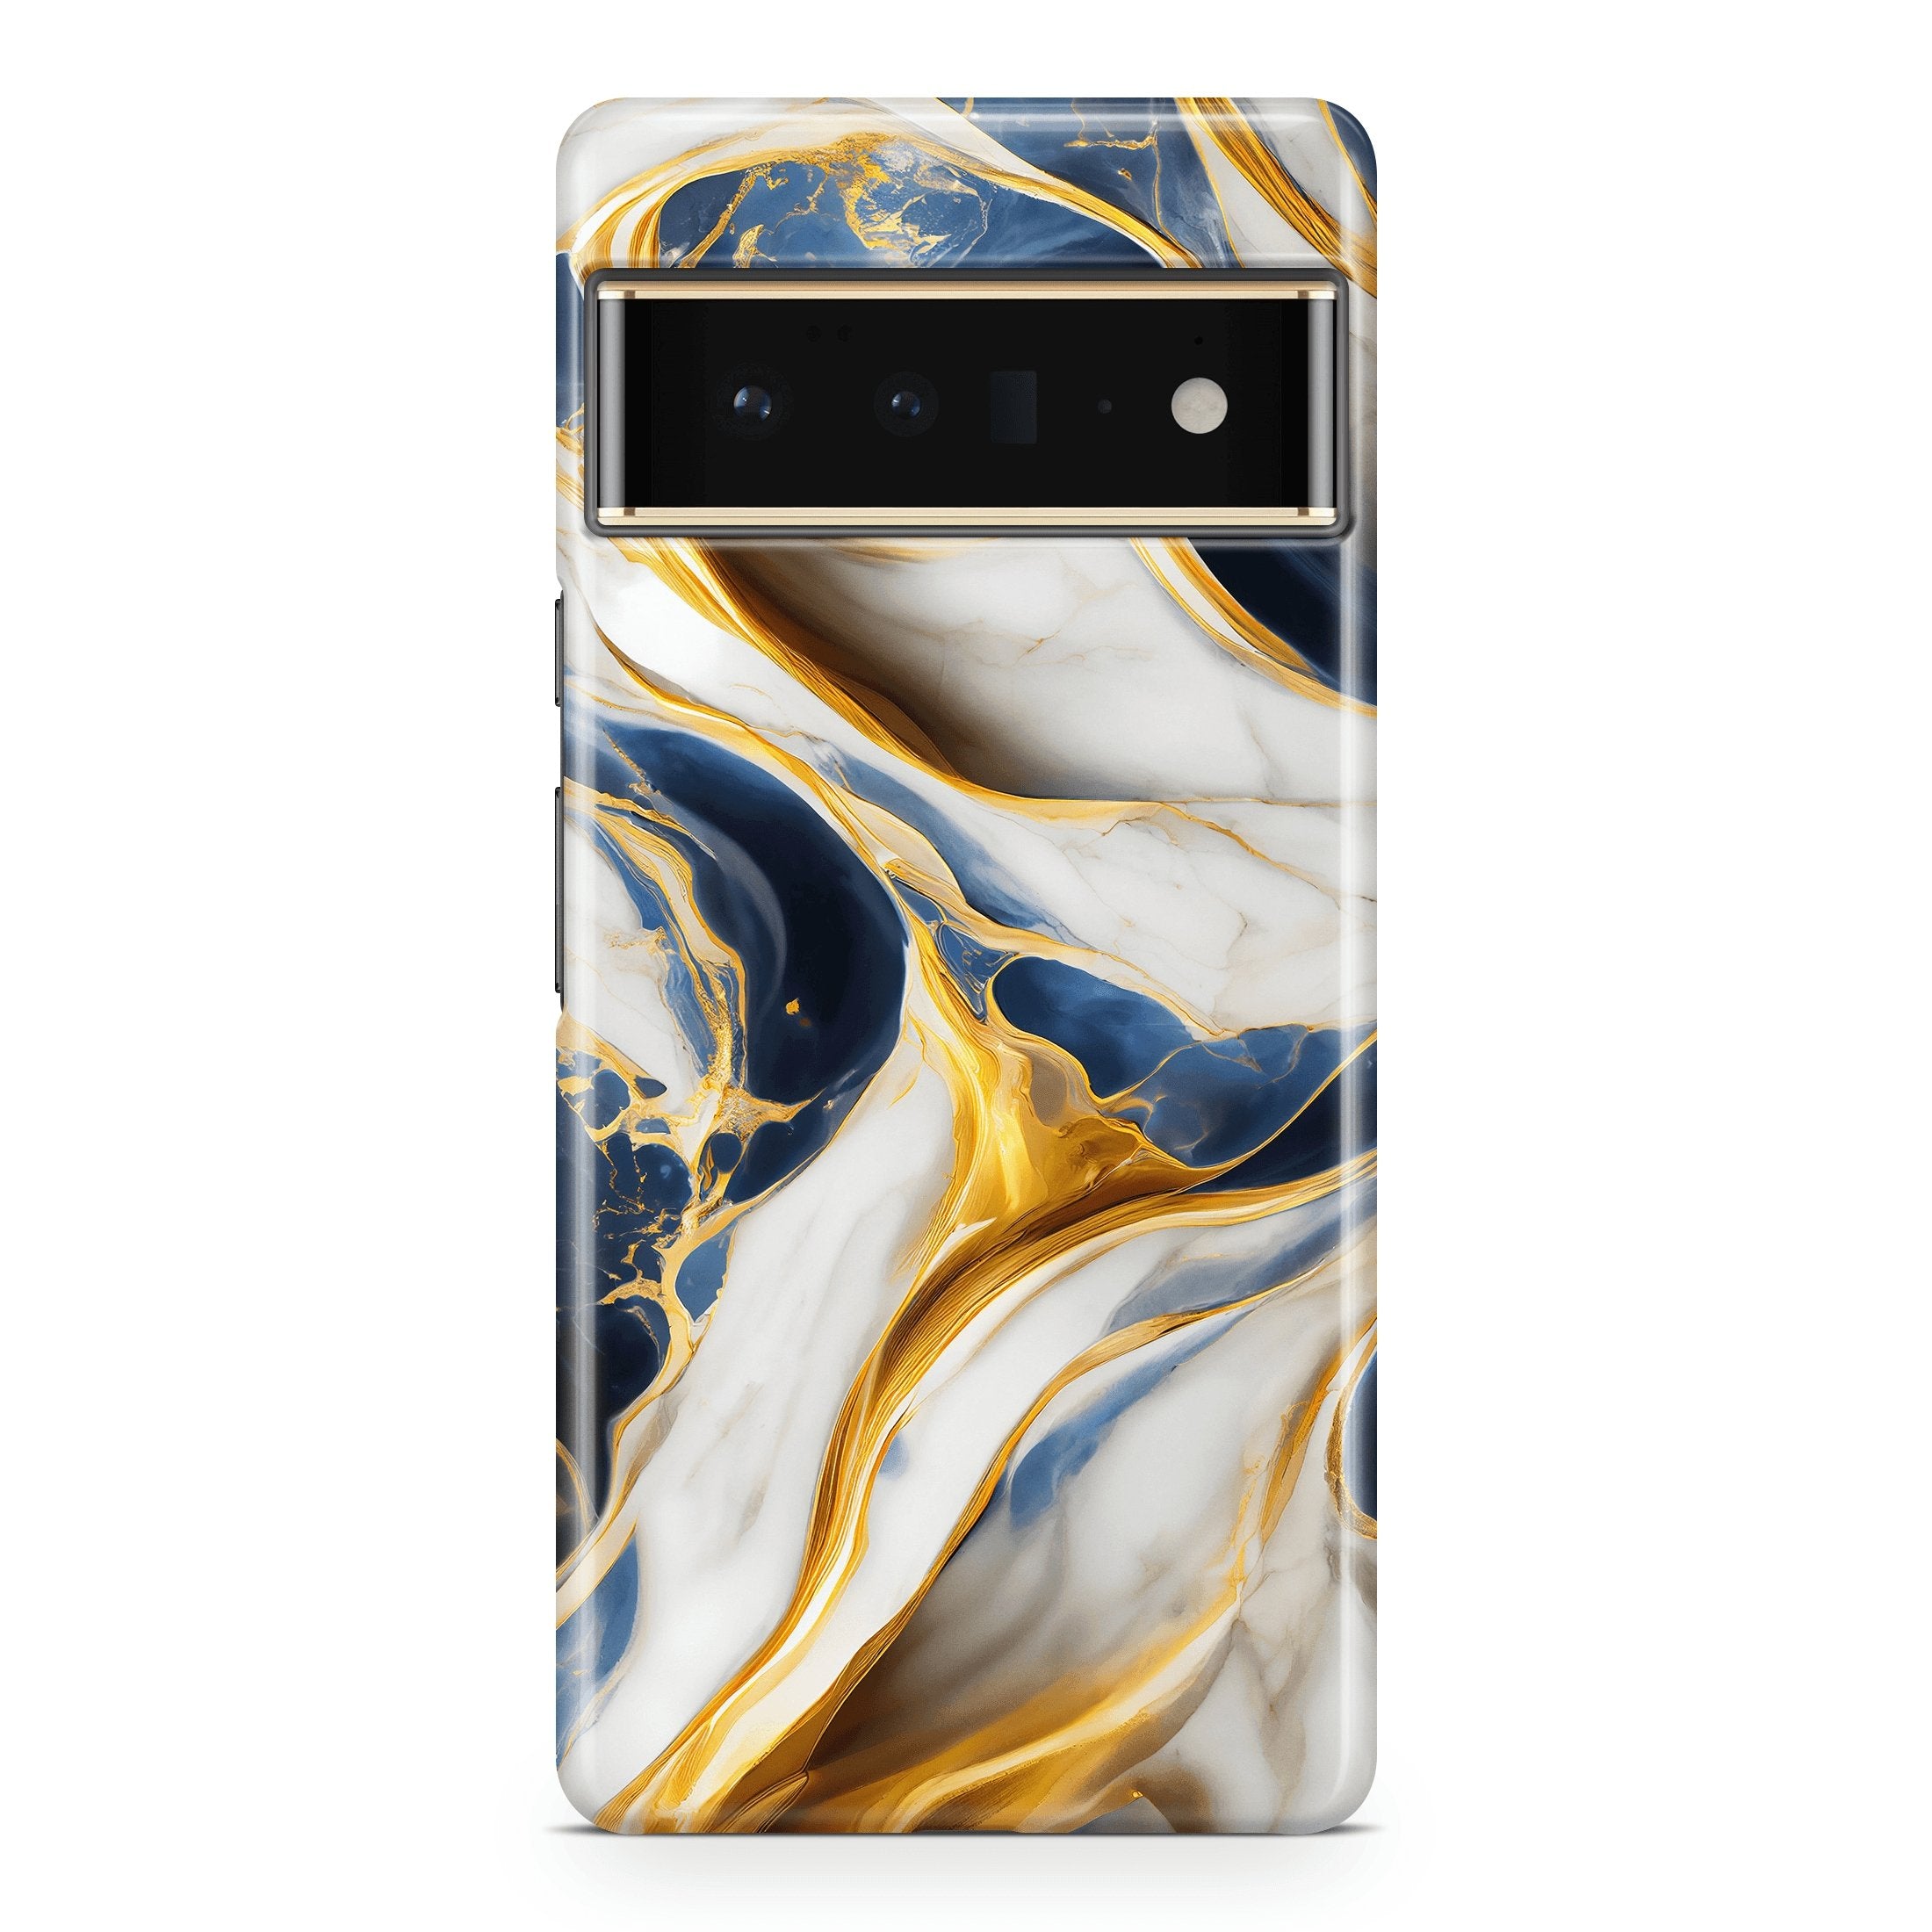 World Marble - Google phone case designs by CaseSwagger